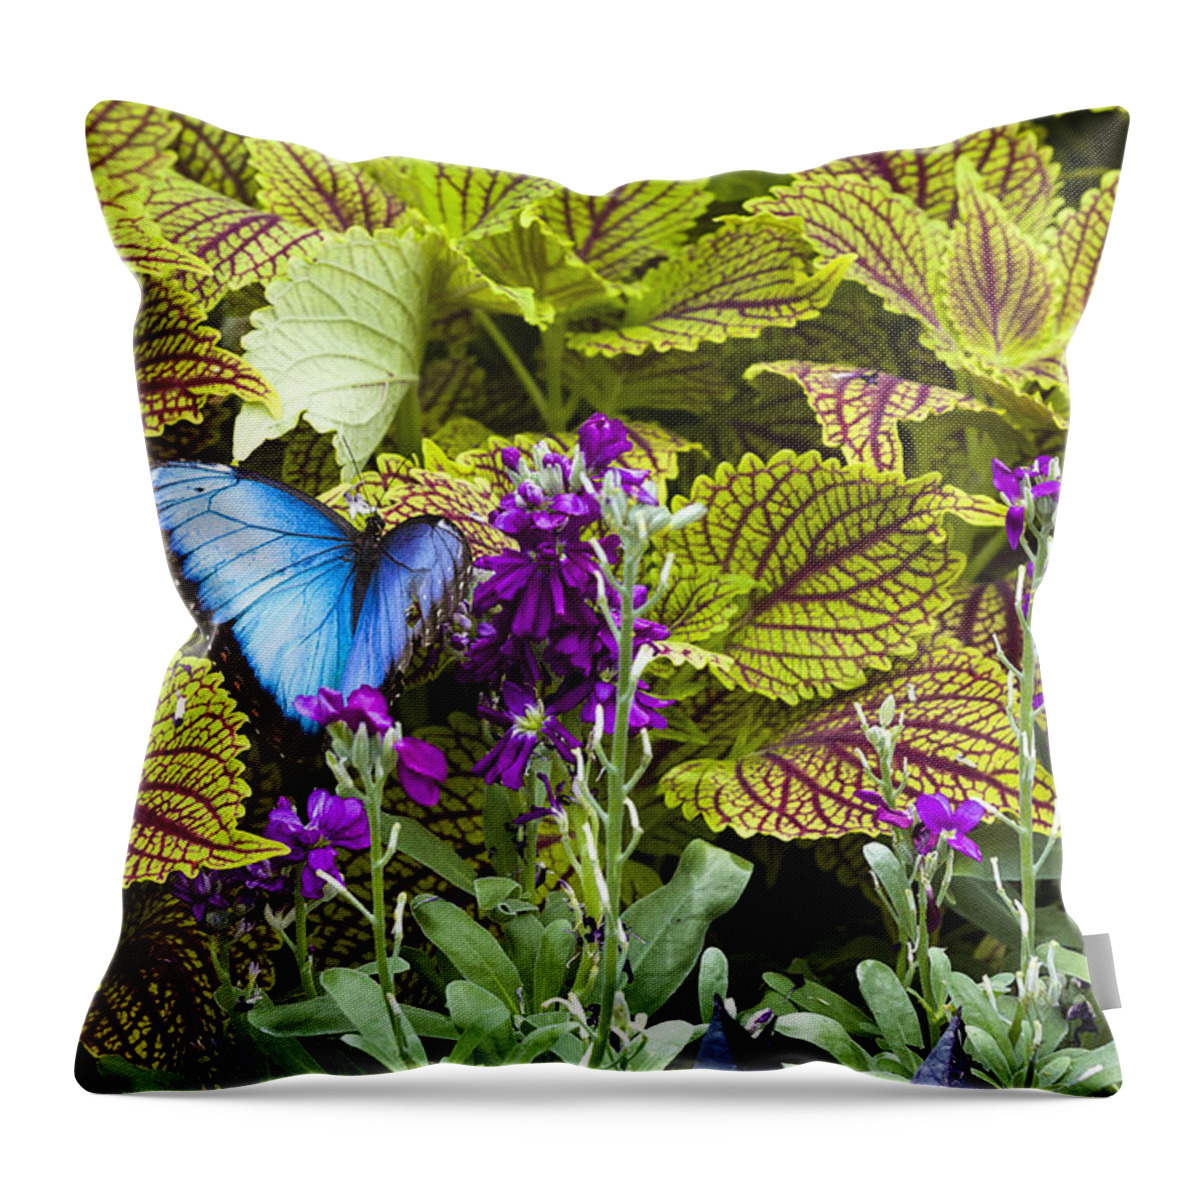 Animal Throw Pillow featuring the photograph Common Blue Morpho Butterfly by Jack R Perry